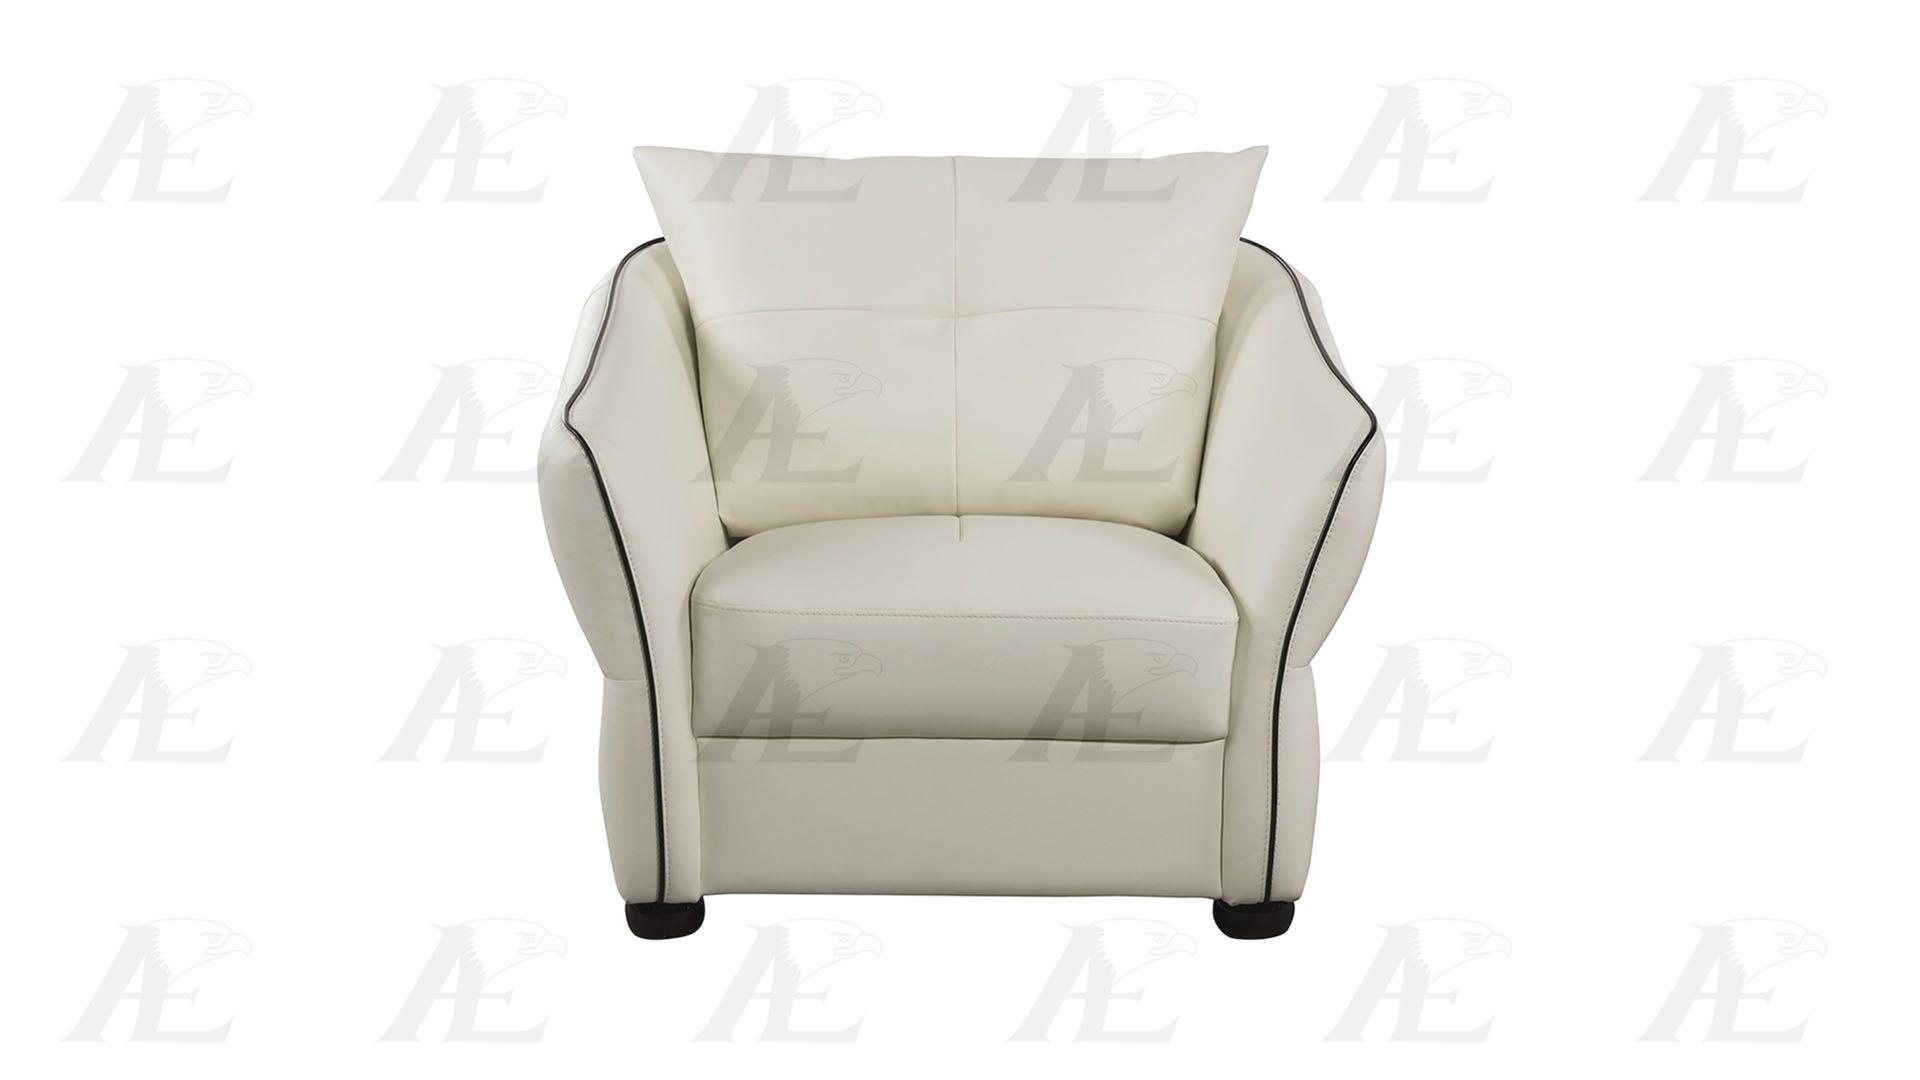 

                    
American Eagle Furniture AE348-IV Sofa Loveseat and Chair Set Ivory Bonded Leather Purchase 
